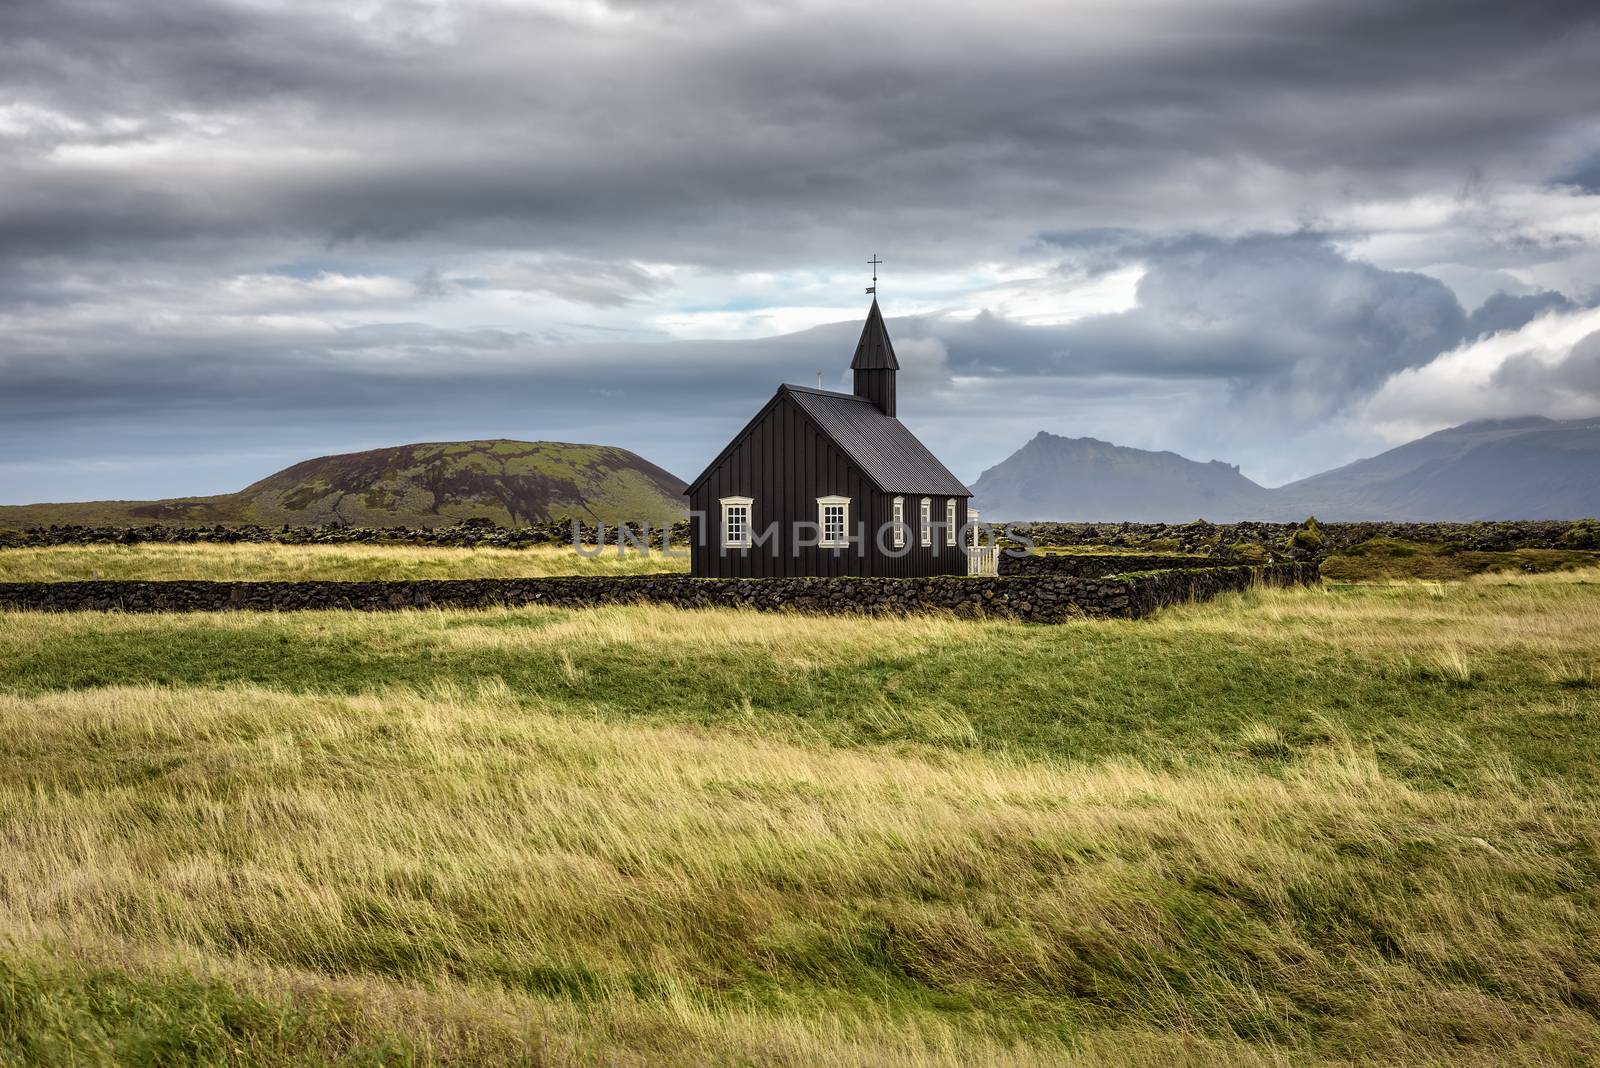 Scenery of black wooden church of Budir in Iceland with the pasture and mountains in the background